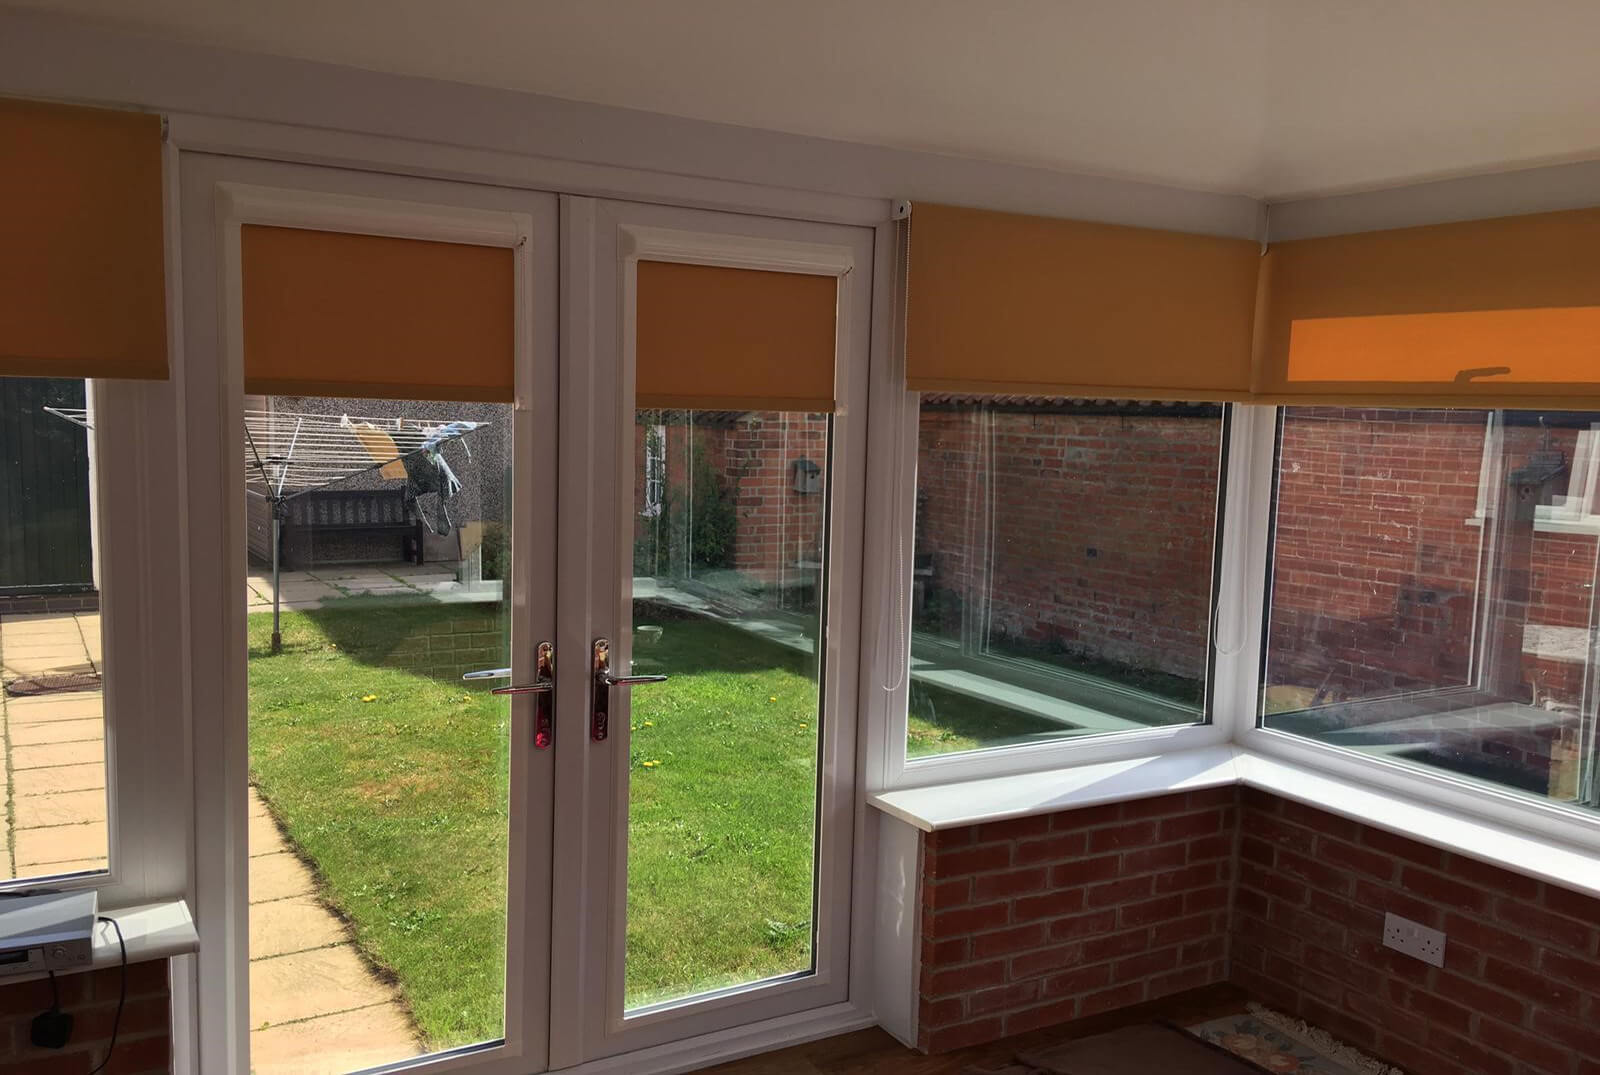 Suppliers of UPVC Windows Perfect Fit Blinds